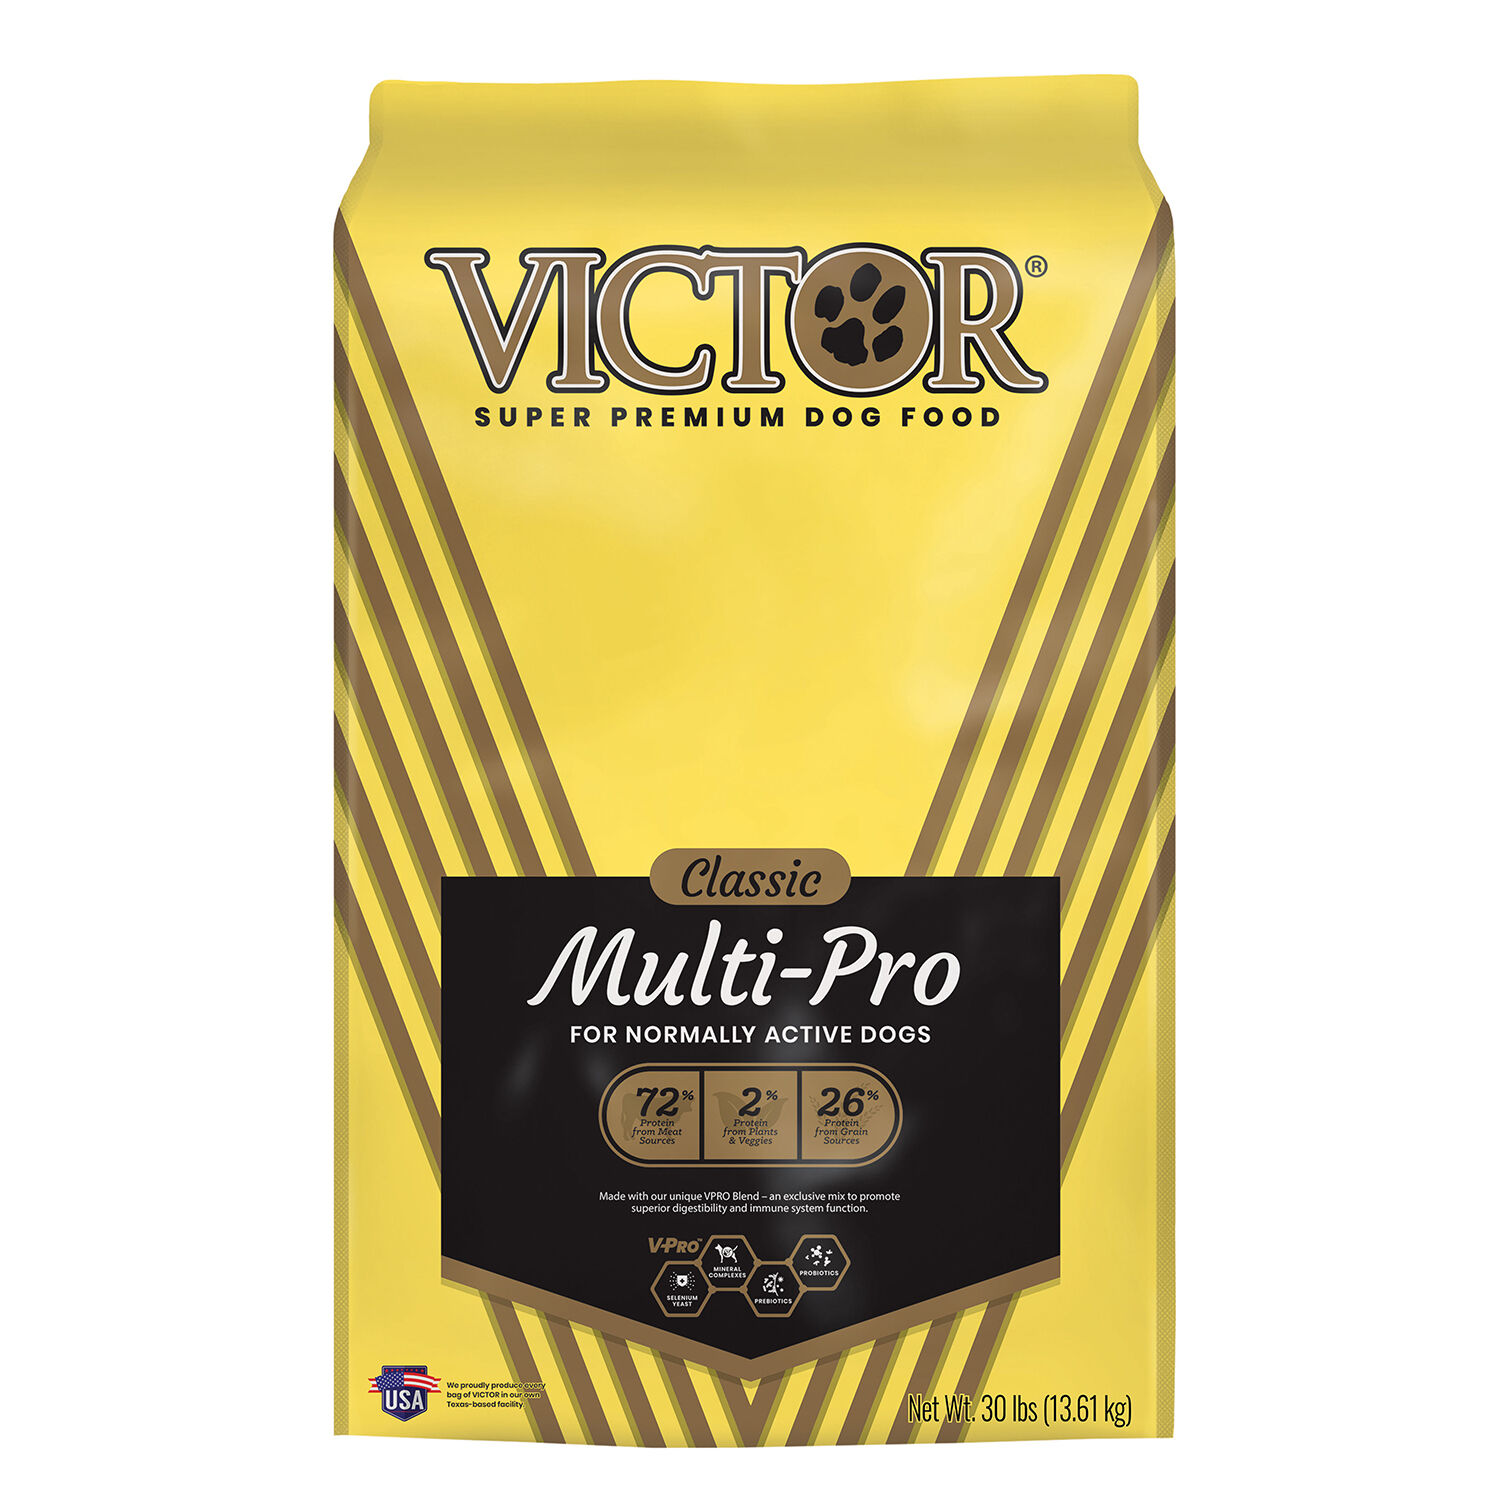 854524005214_30lb_VICTOR_Classic_MultiPro_Front (1).jpg